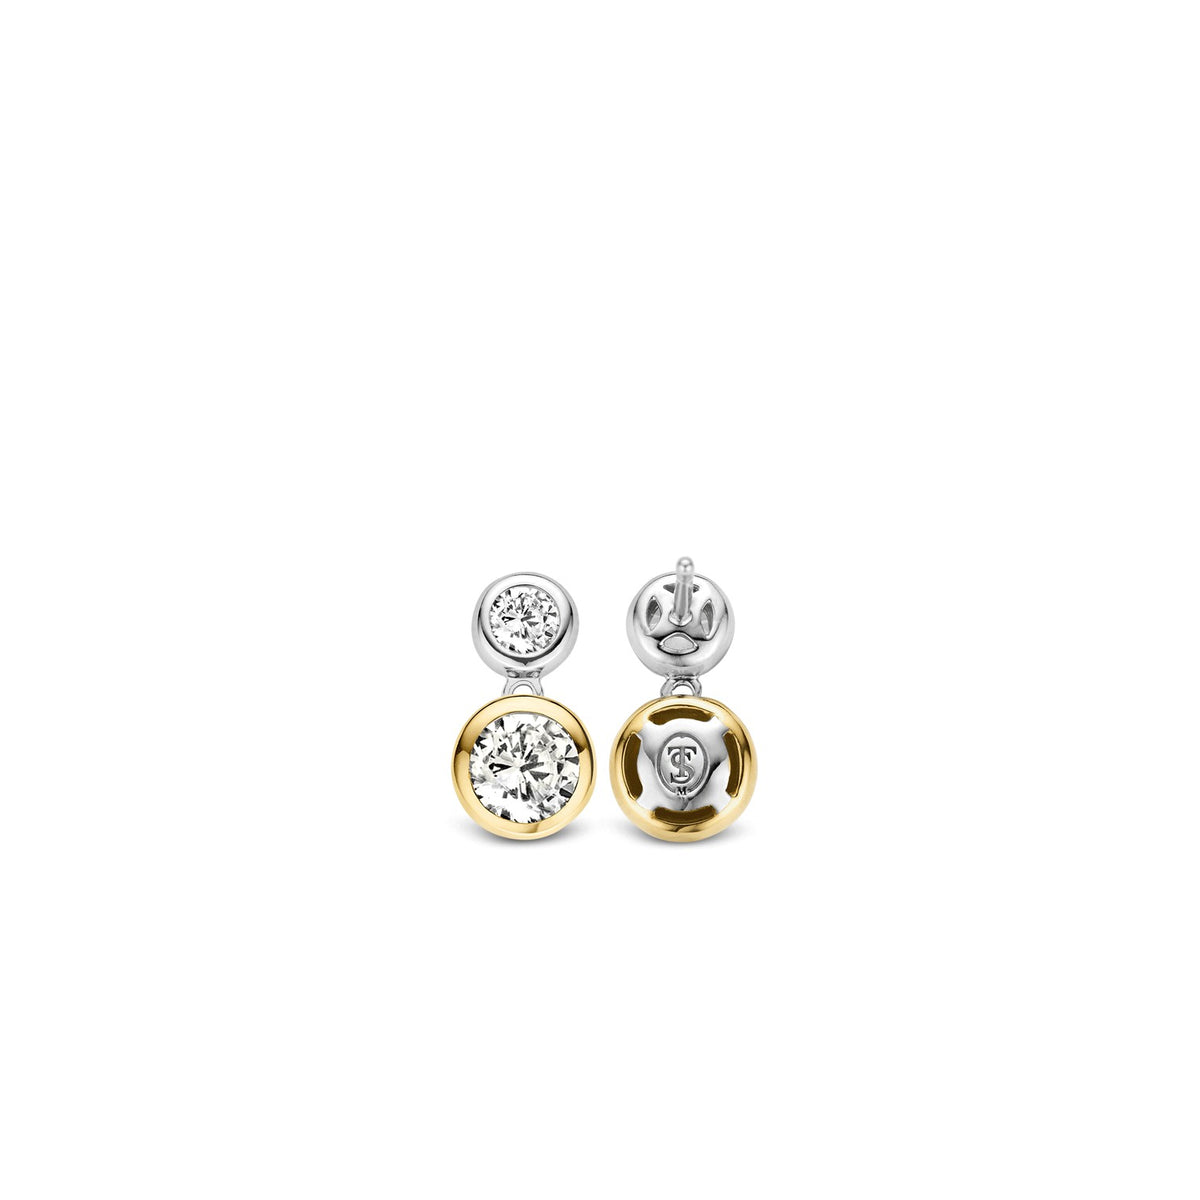 TI SENTO Sterling Silver Two Tone Earrings with Two Bezel Set Cubic Zirconia